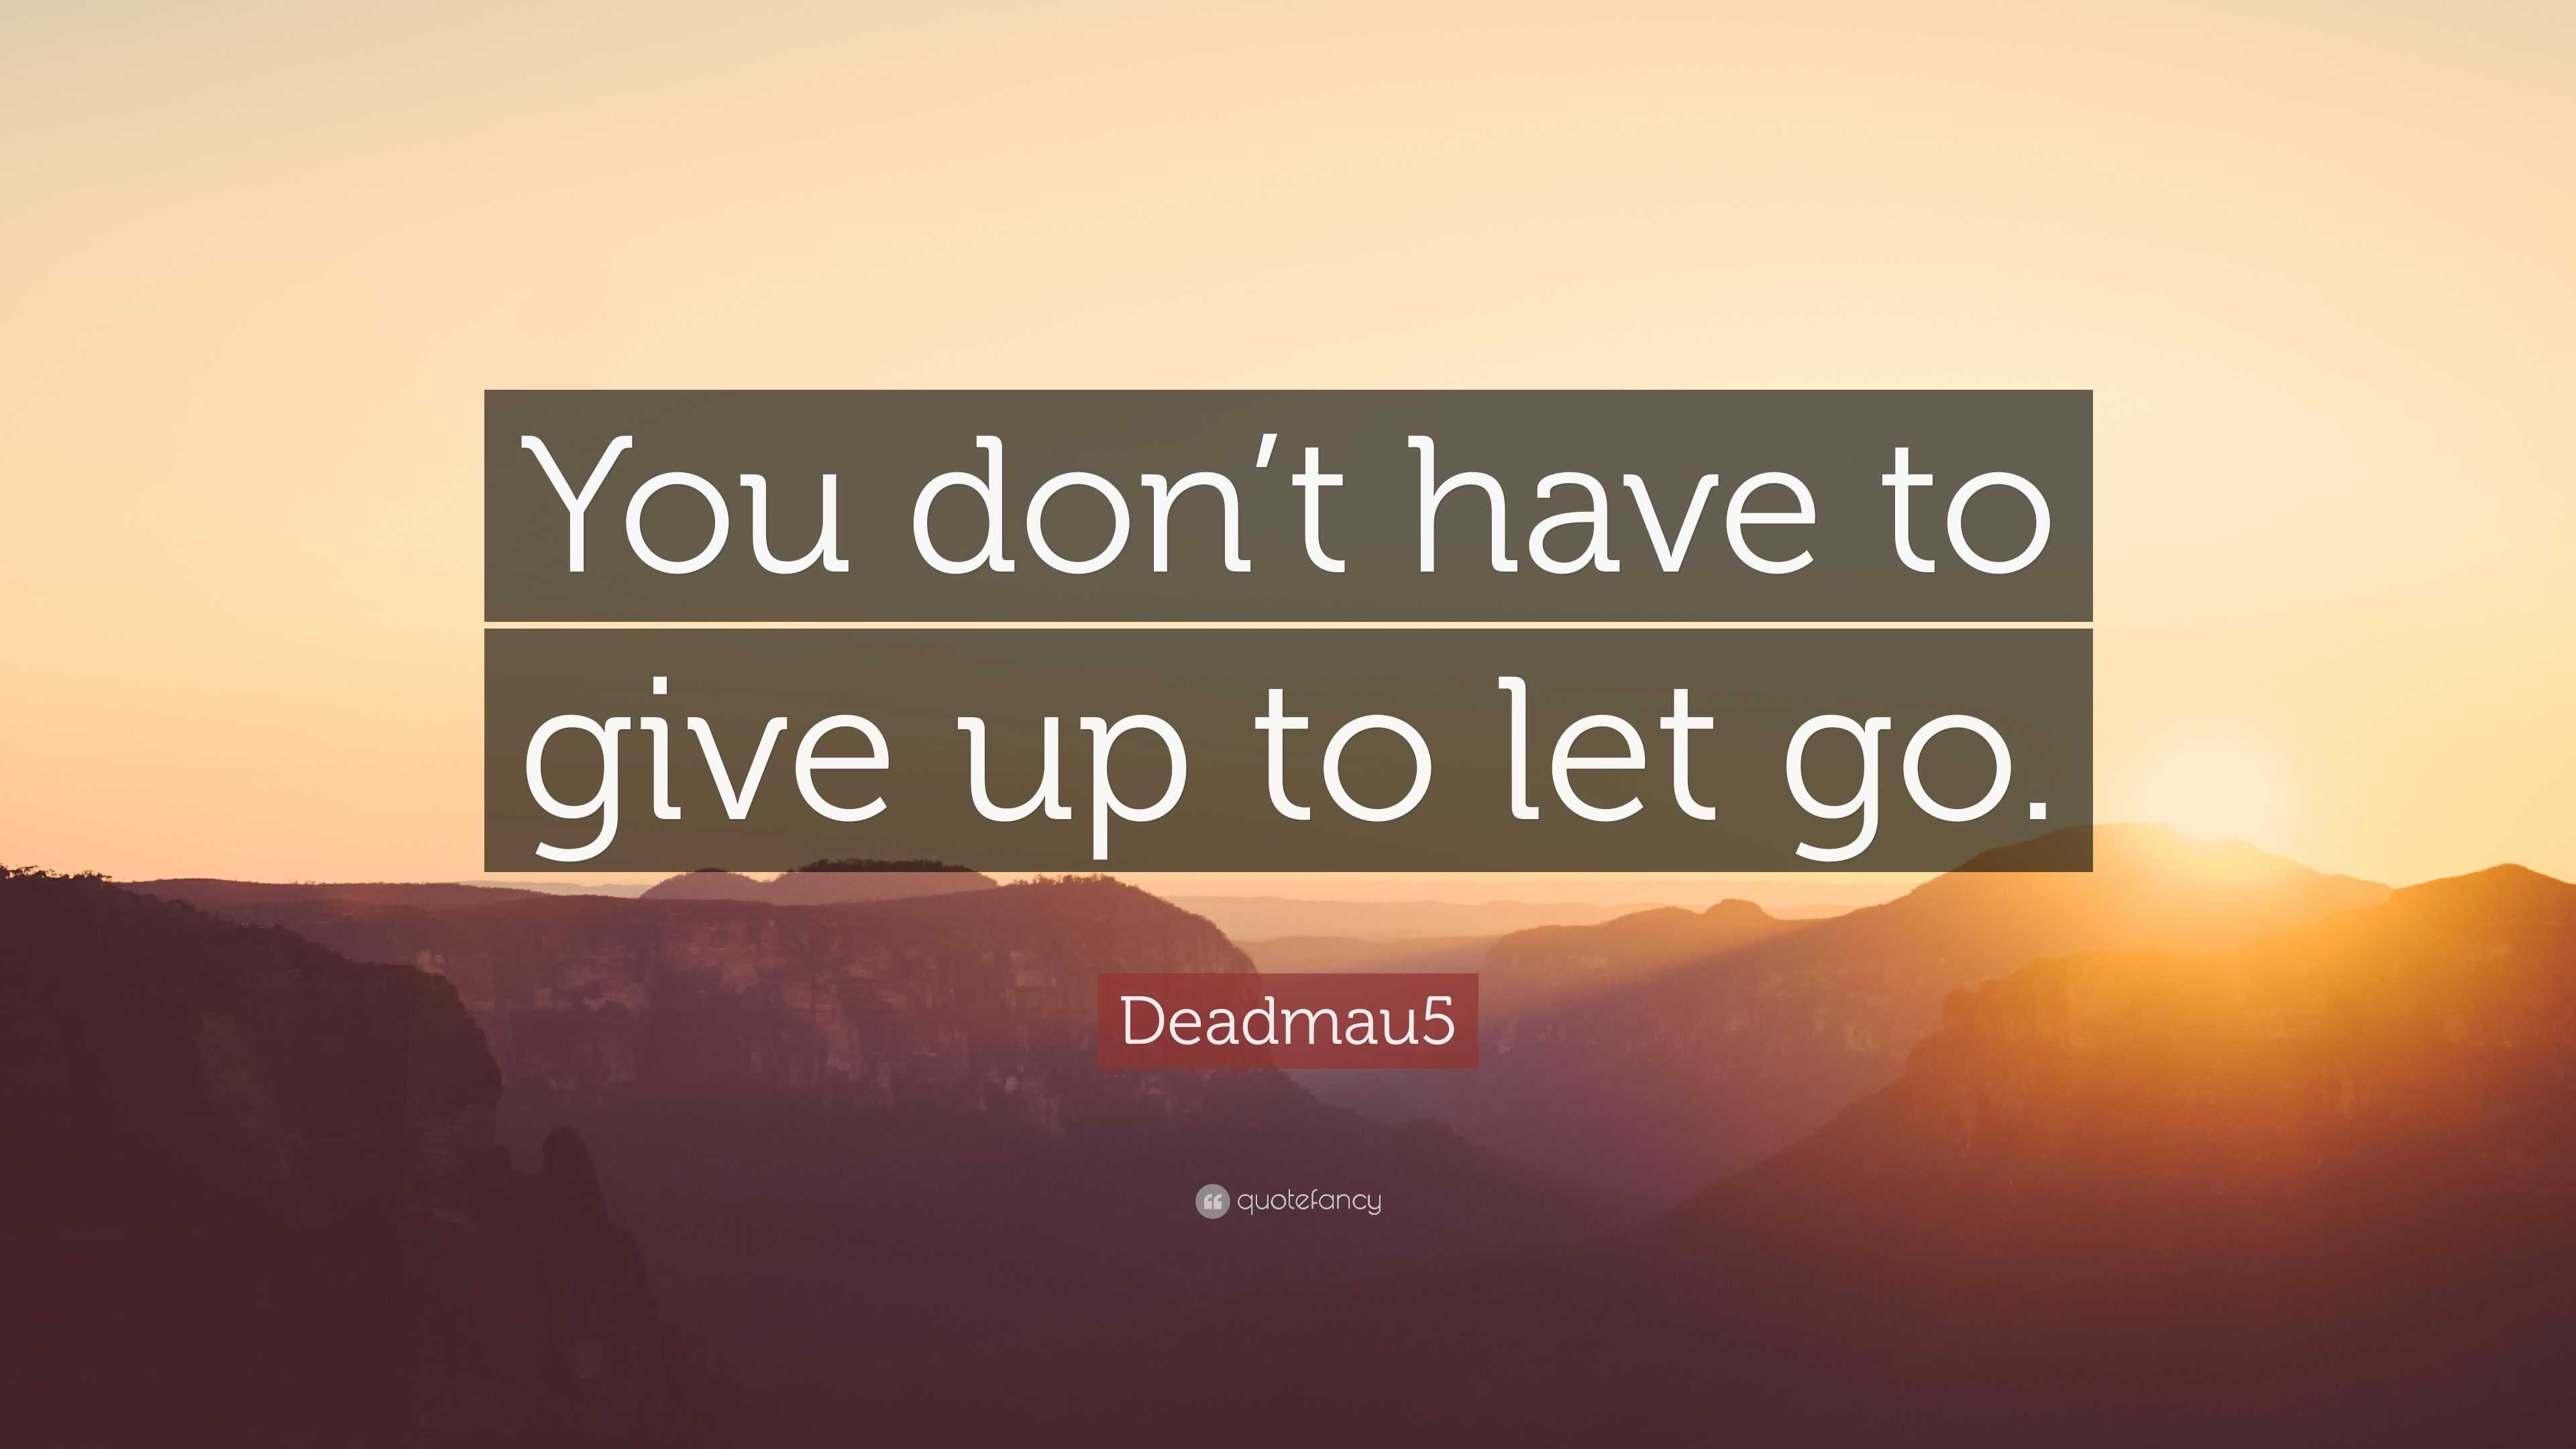 Deadmau5 Quote: “You don’t have to give up to let go.”